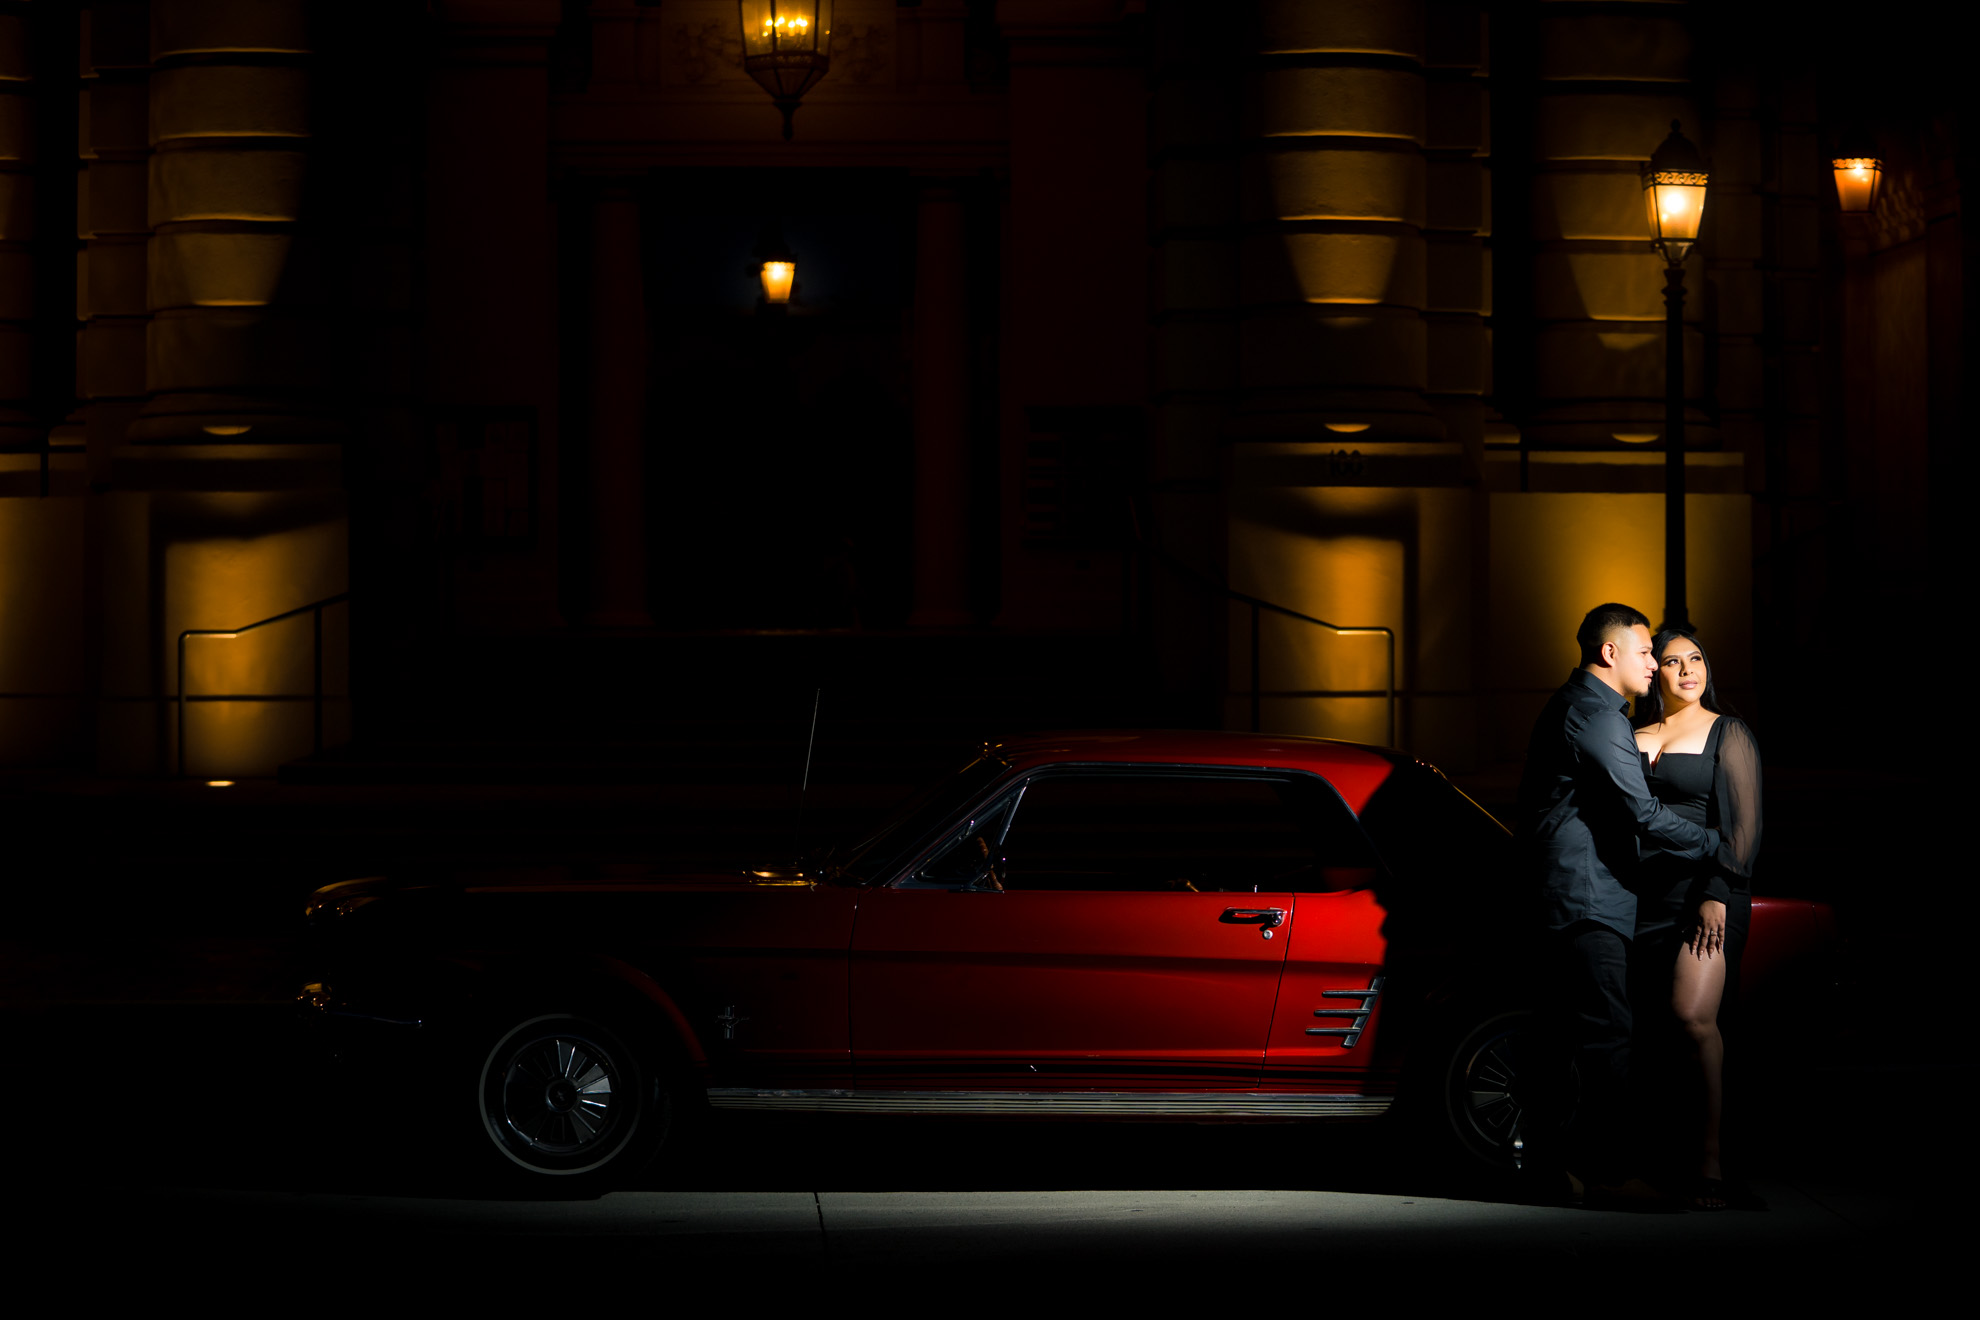 ThomasKim_photography A couple posing in front of a red car at night.